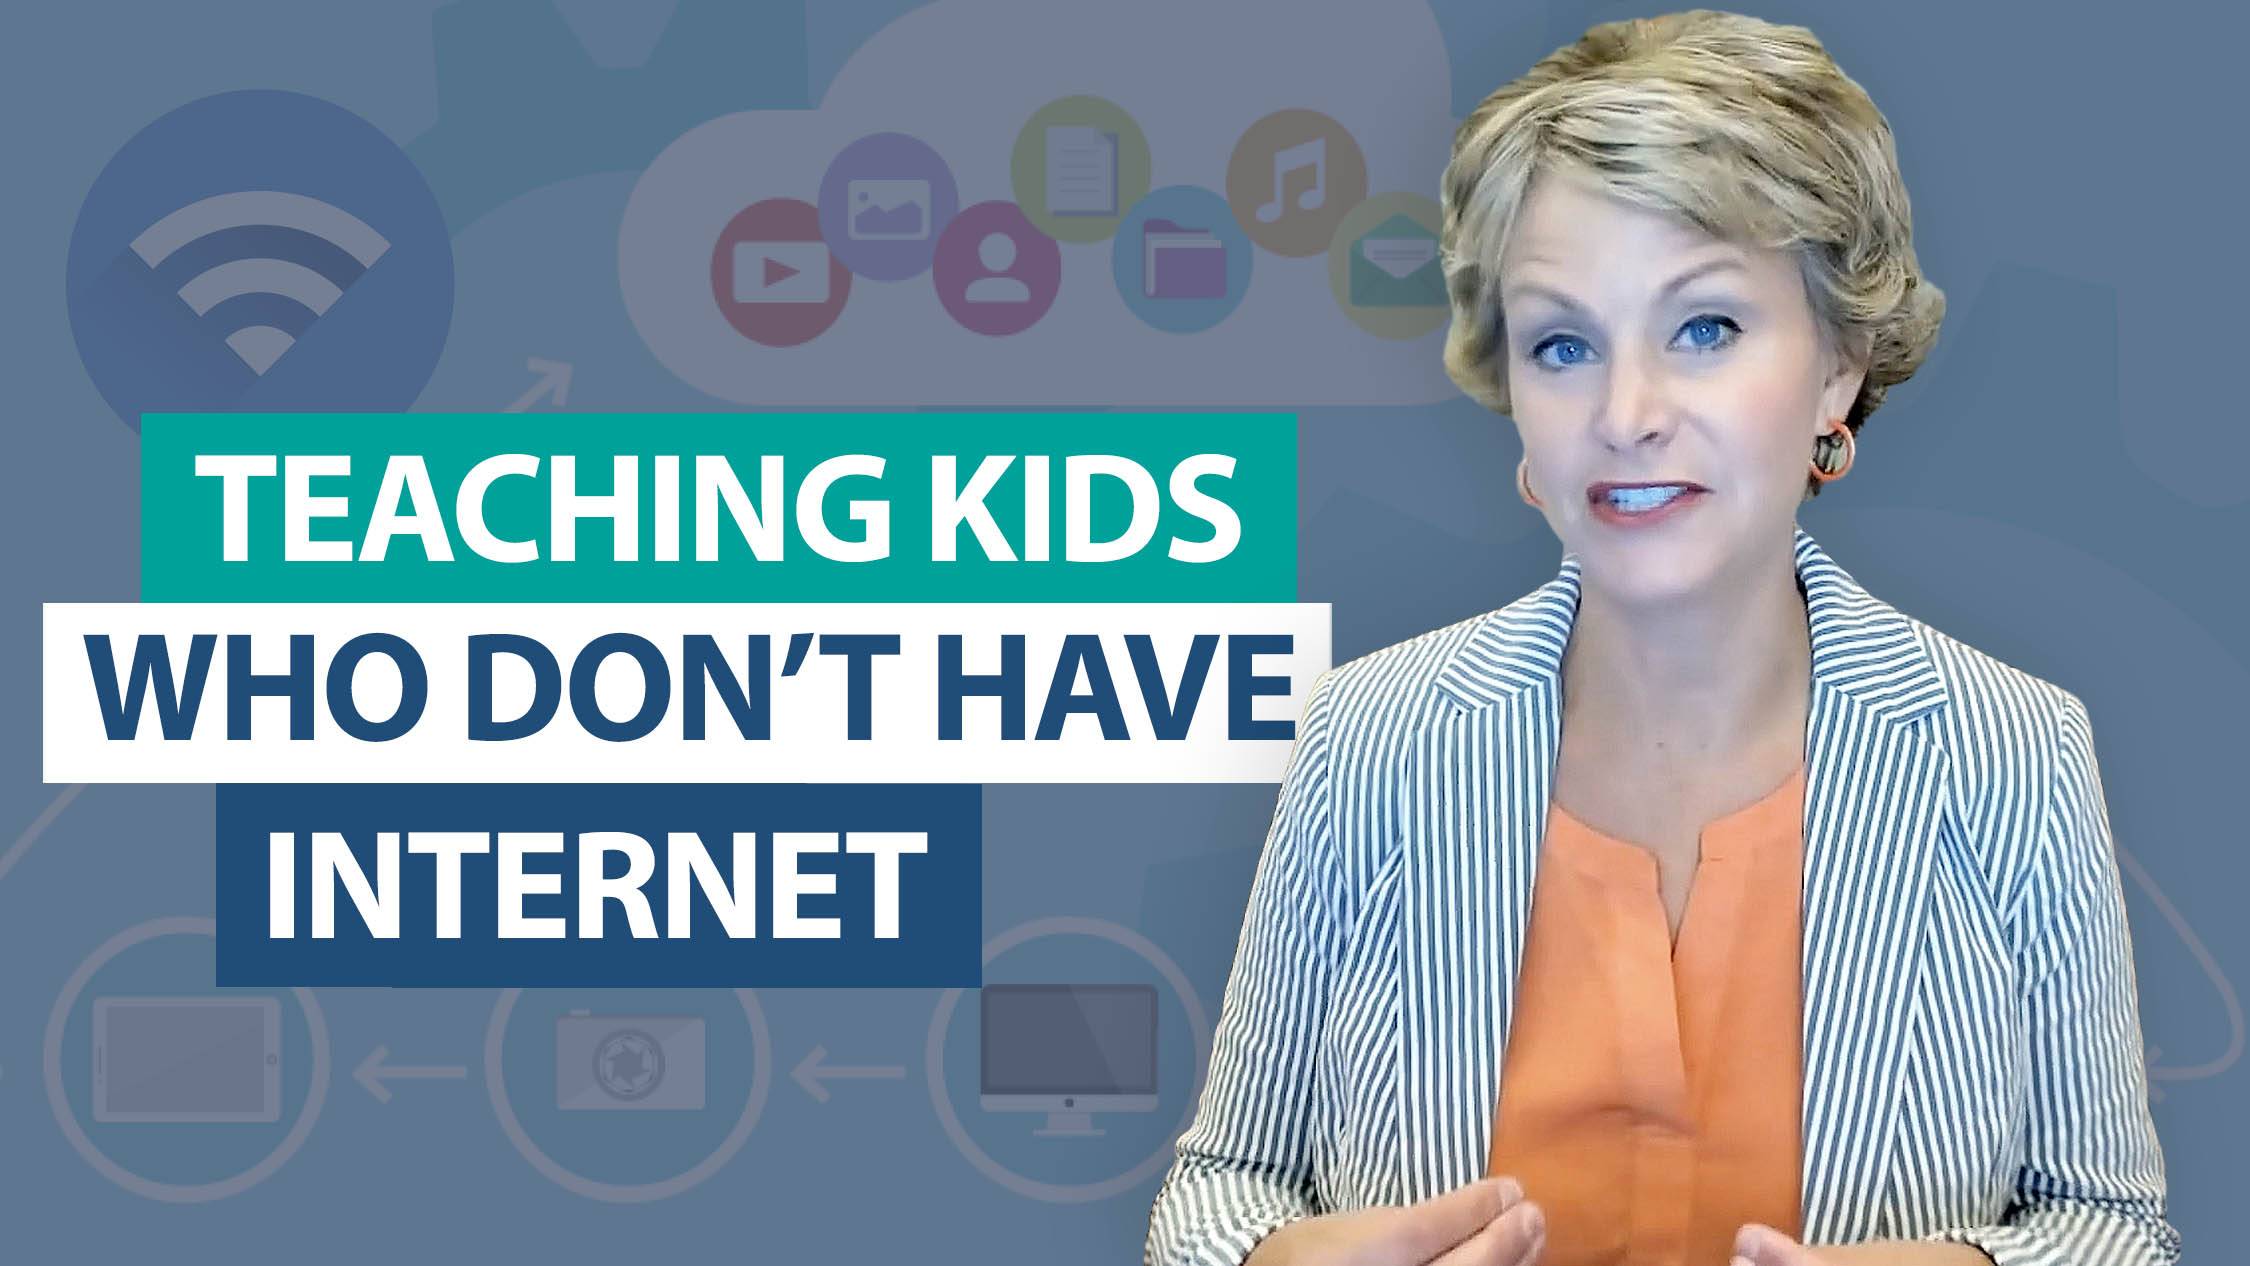 How do I teach remotely when students don't have the internet?